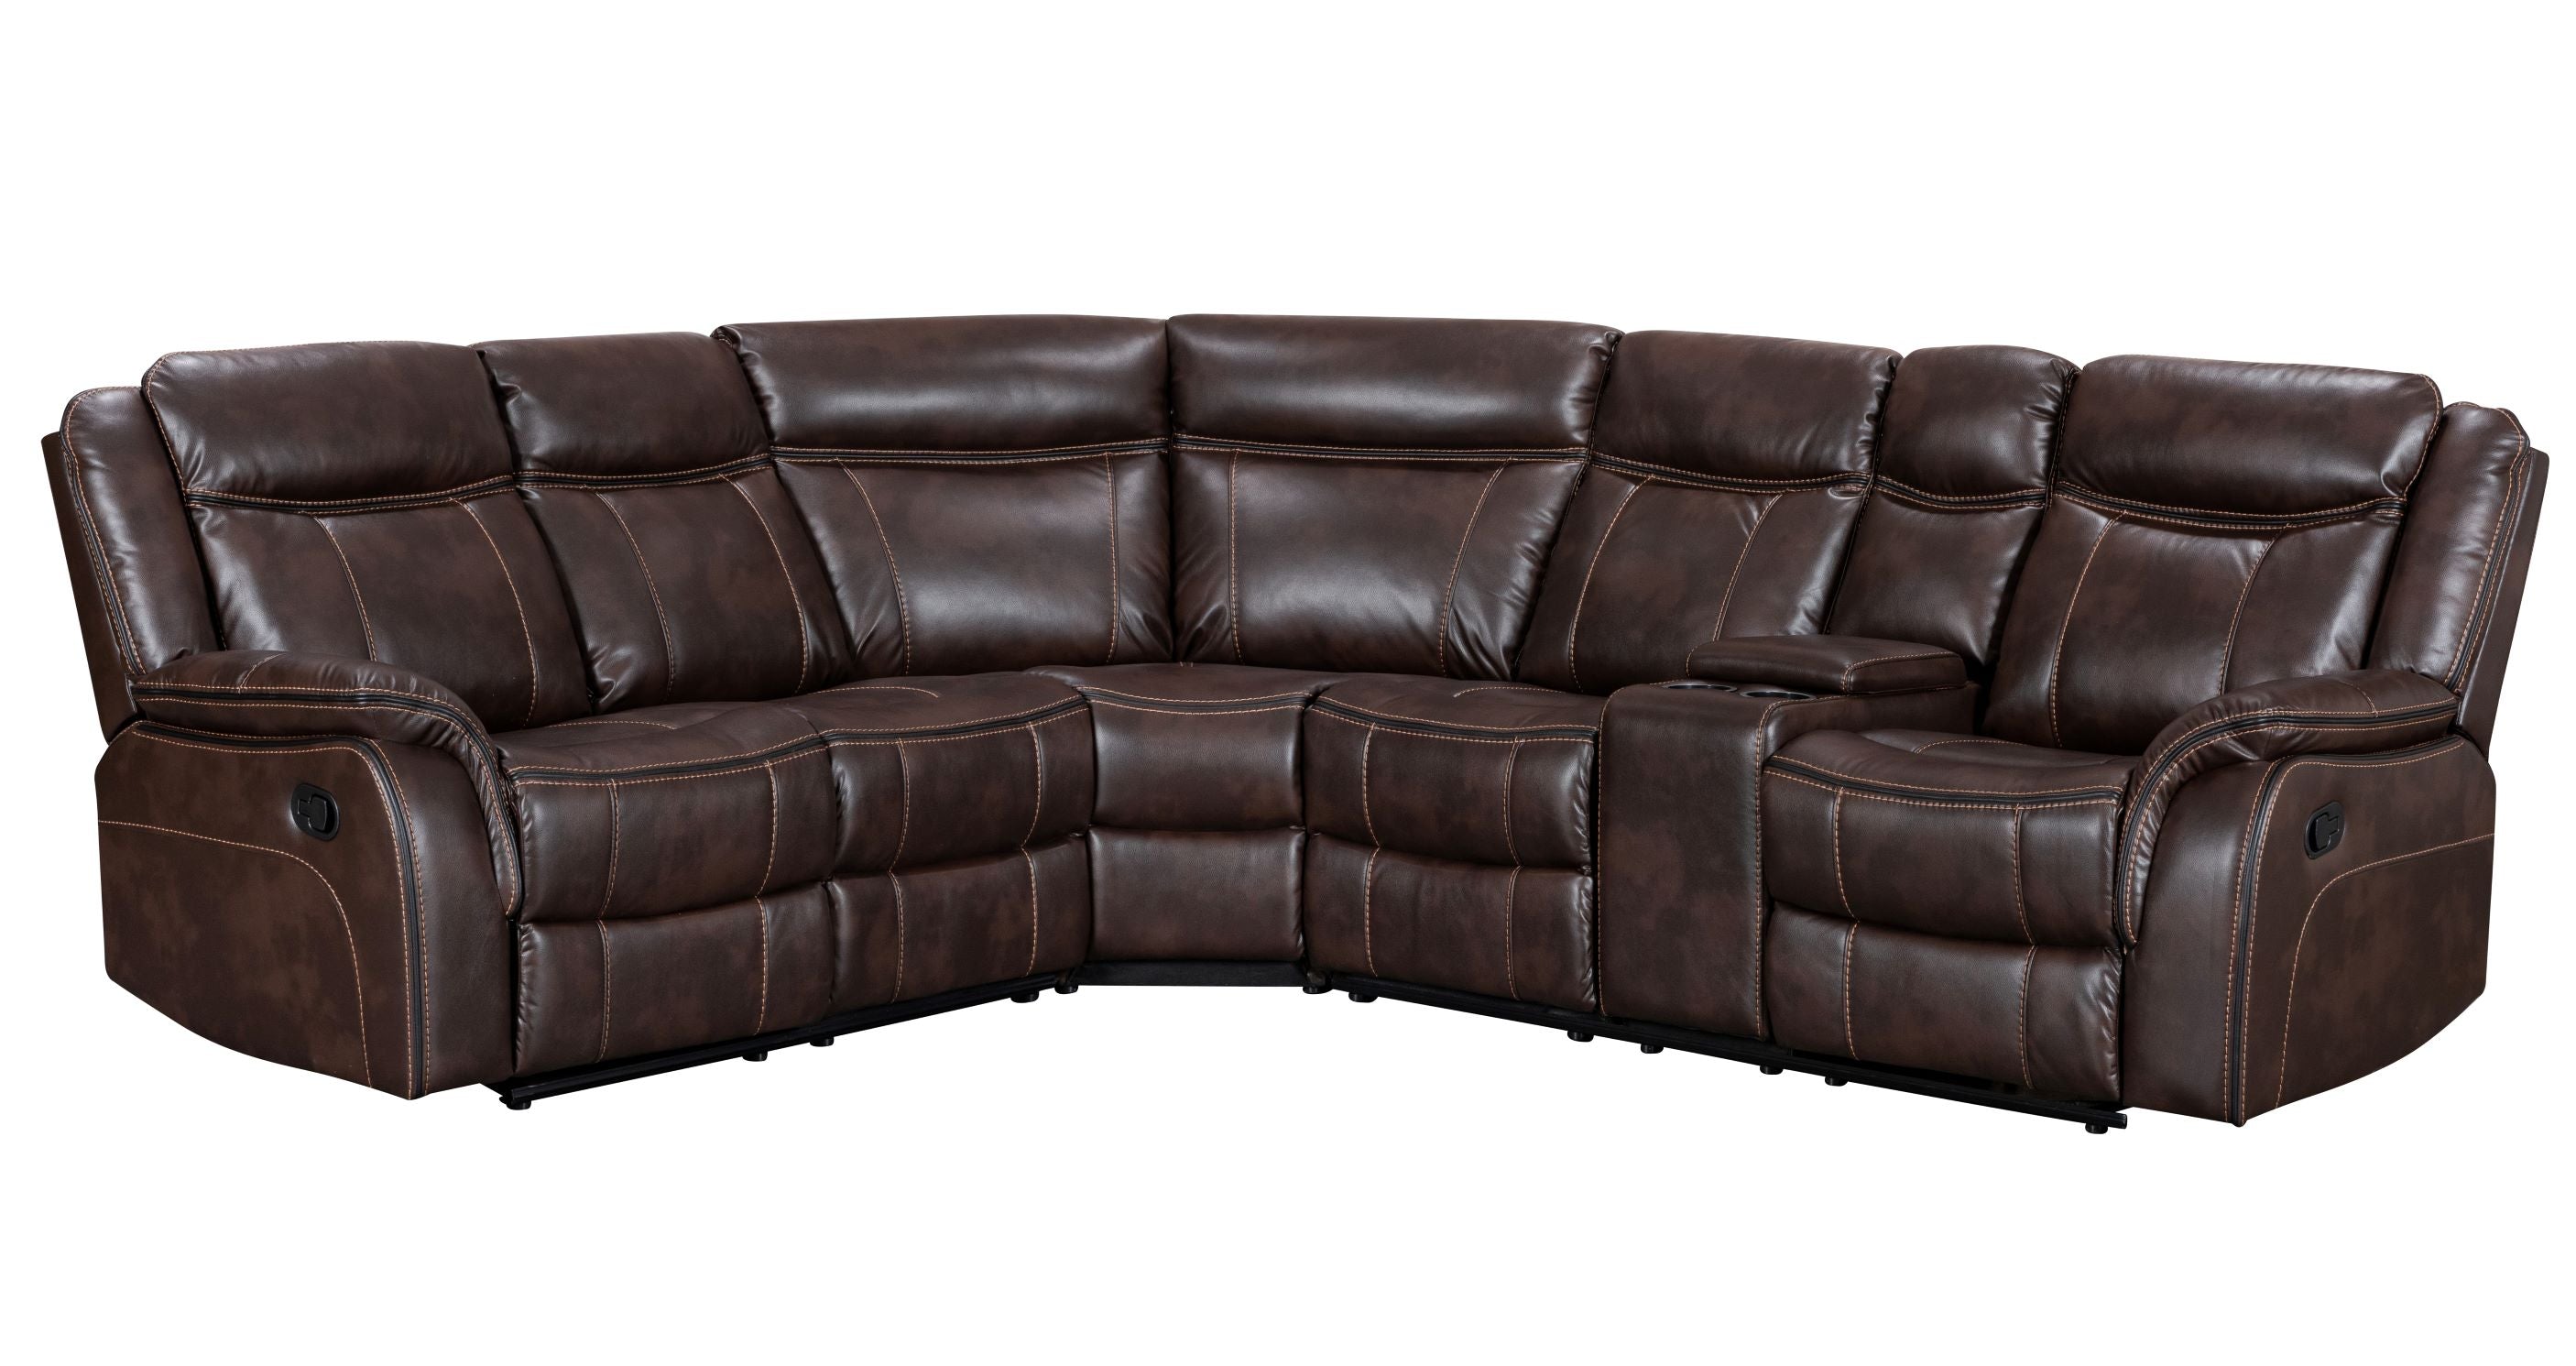 Neoma Manual Recliner Sectional Sofa Brown Gel Leather 70220